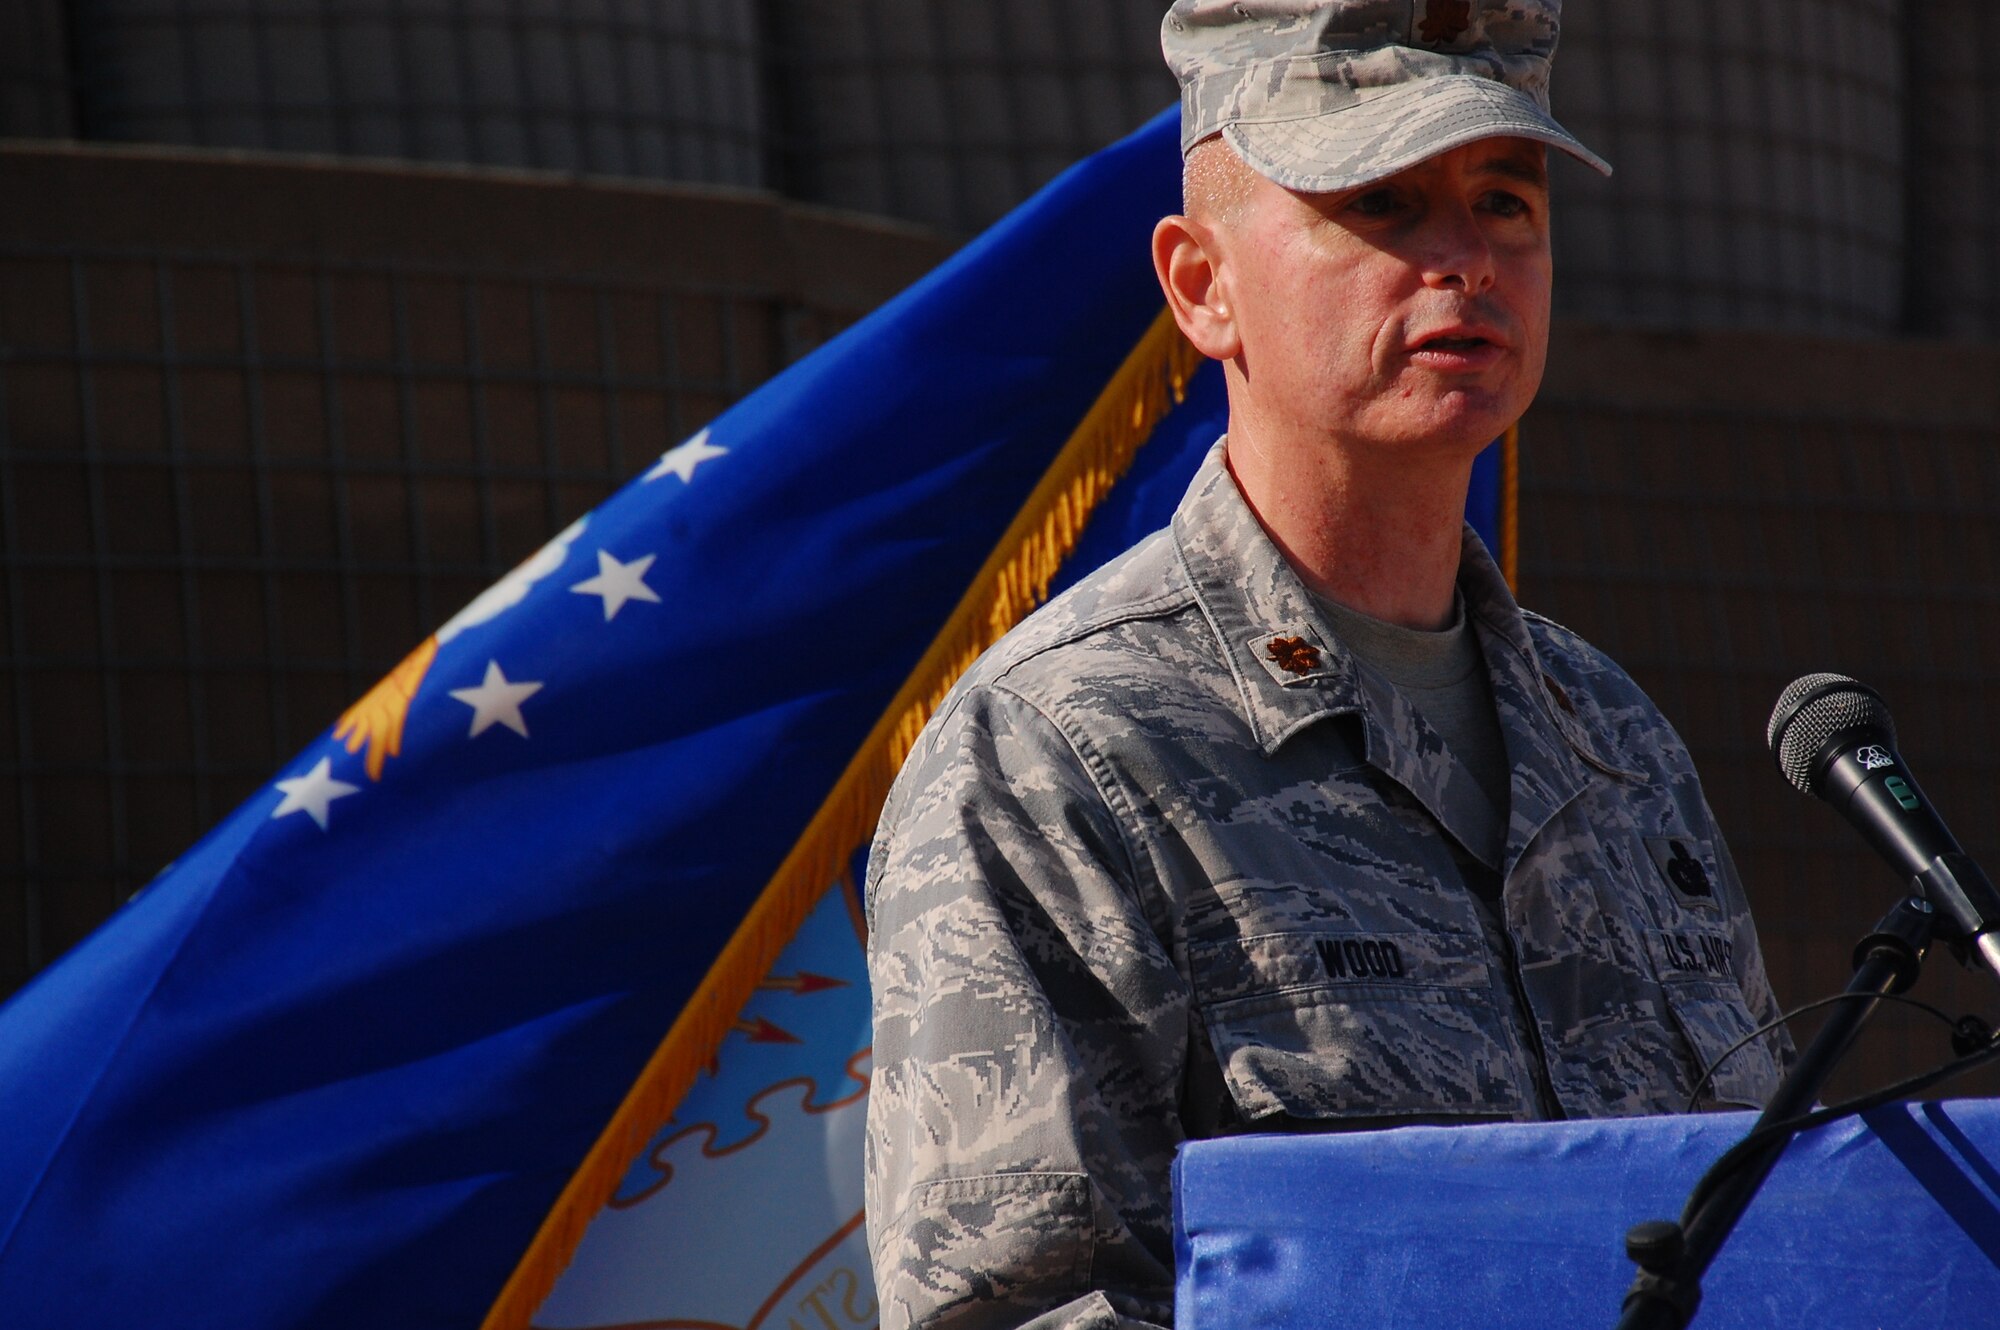 CAMP BUCCA, Iraq -- Maj. Larry Wood, 887th Expeditionary Security Forces Squadron commander, addresses attendees during the 887th ESFS Deactivation Ceremony Dec. 3, 2009. The 887th ESFS was activated in 2004 and was responsible for all-around, full-spectrum defense of the camp. The ceremony was held to mark the successful completion of their mission. The job of base security will be turned back over to Army personnel. (U.S. Air Force photo/Staff Sgt. Shaun Emery)